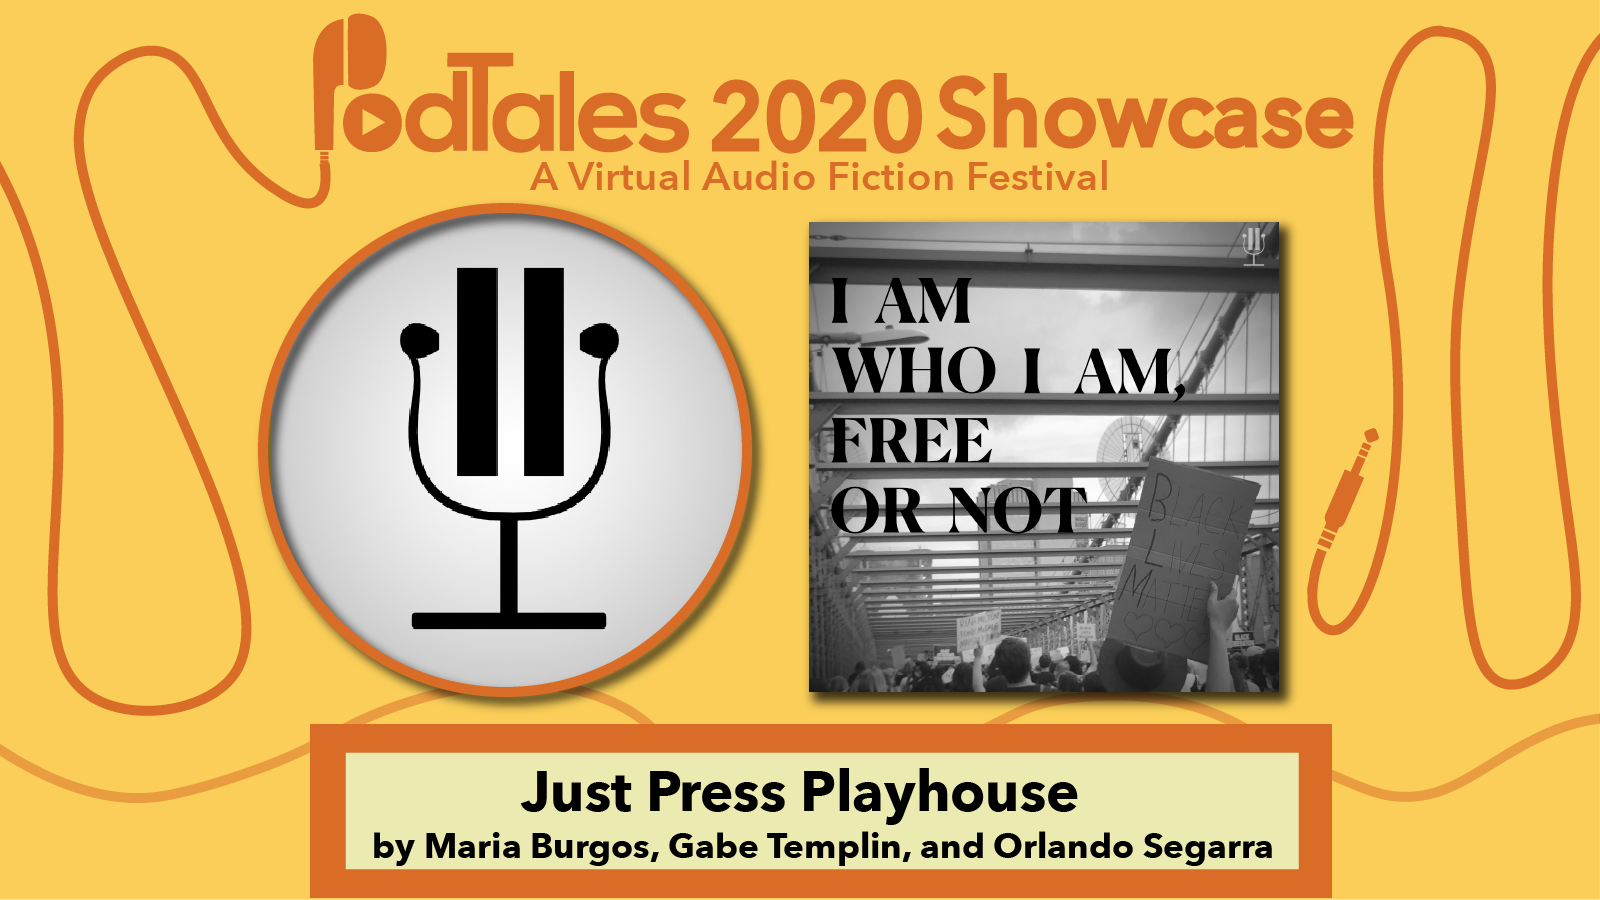 Text reading “PodTales 2020 Showcase: A Virtual Audio Fiction Festival”, Just Press Playhouse Logo, Show Art for I Am Who I Am, Free or Not, Text reading “Just Press Playhouse by Maria Burgos, Gabe Templin, and Orlando Segarra”